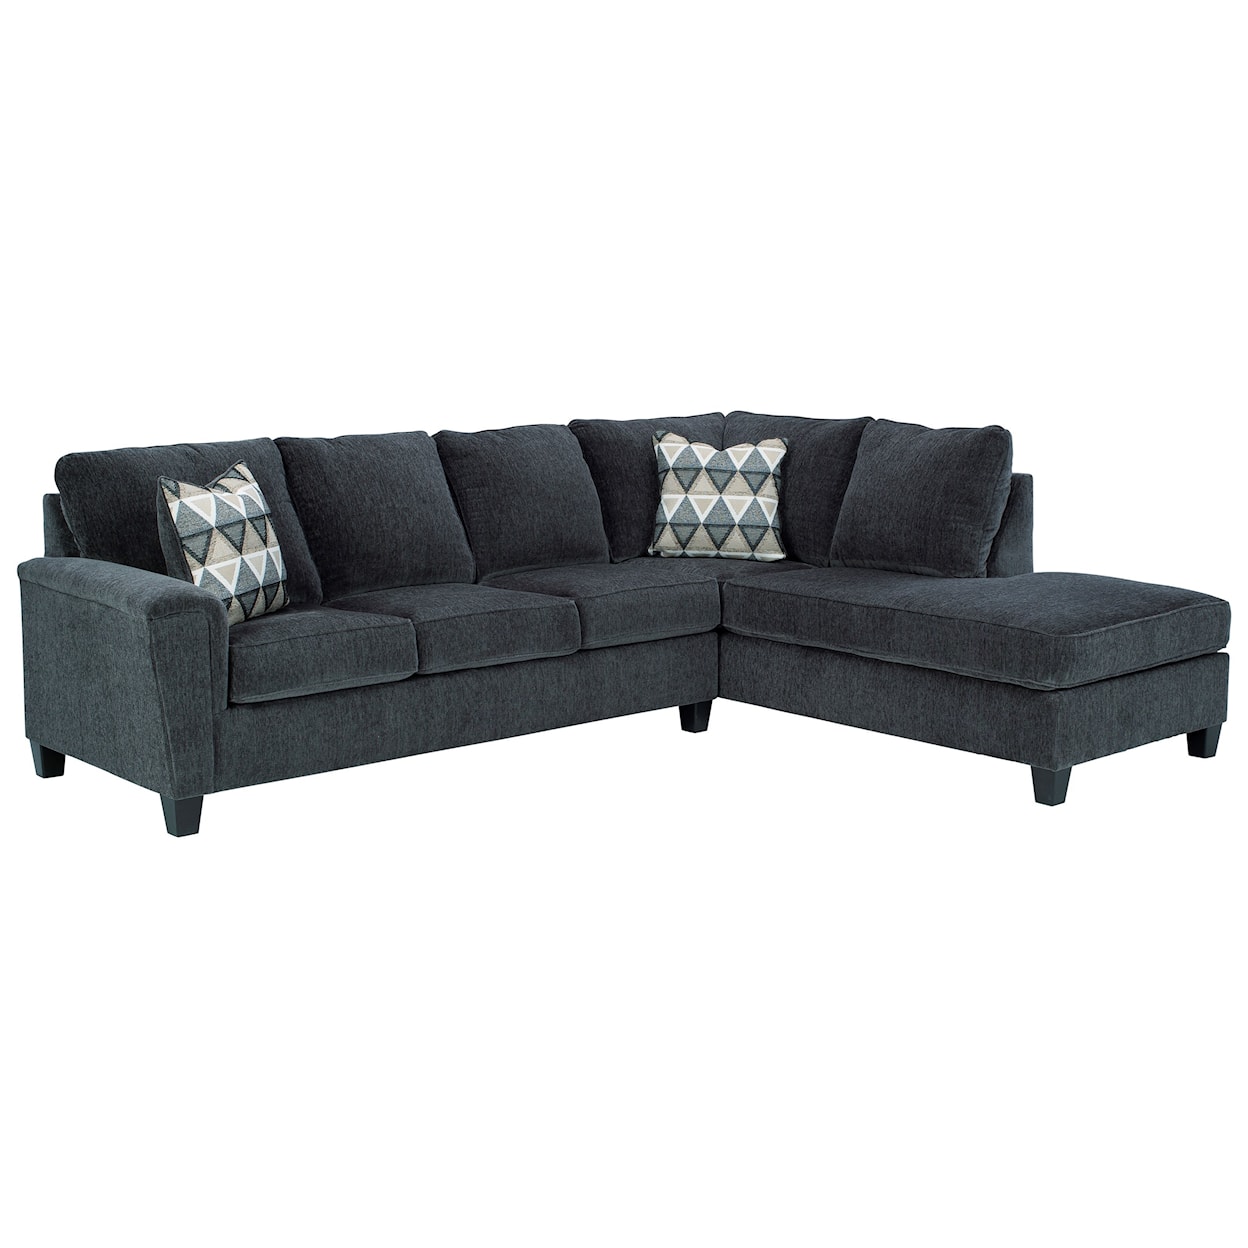 Signature Design by Ashley Abinger 2-Piece Sectional w/ Chaise